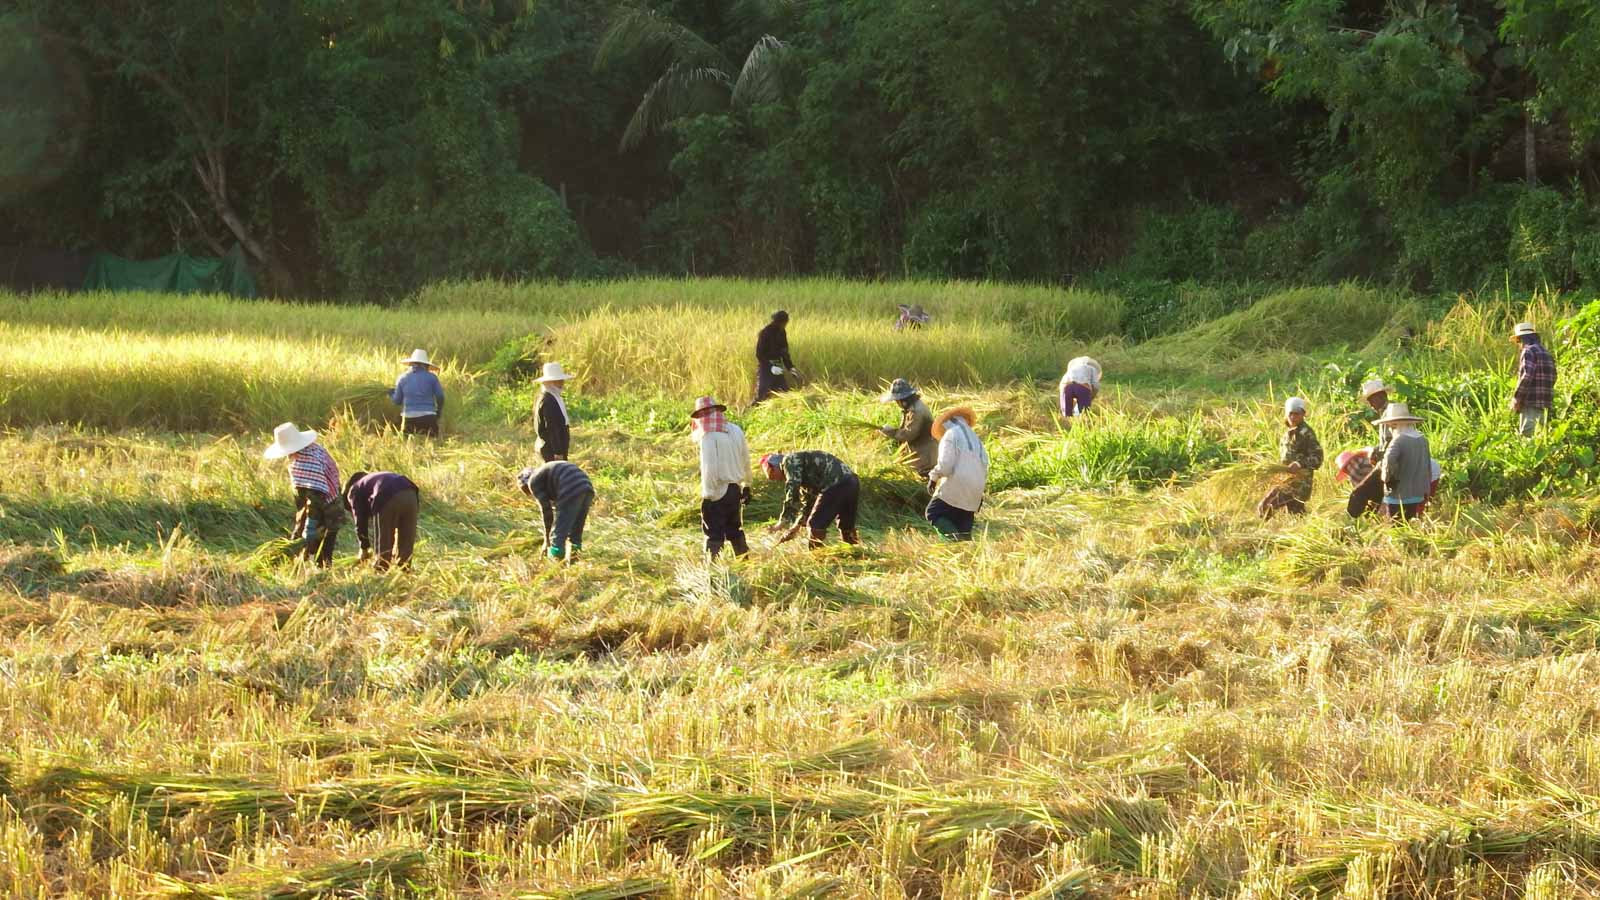 People working in rice fields in Thailand